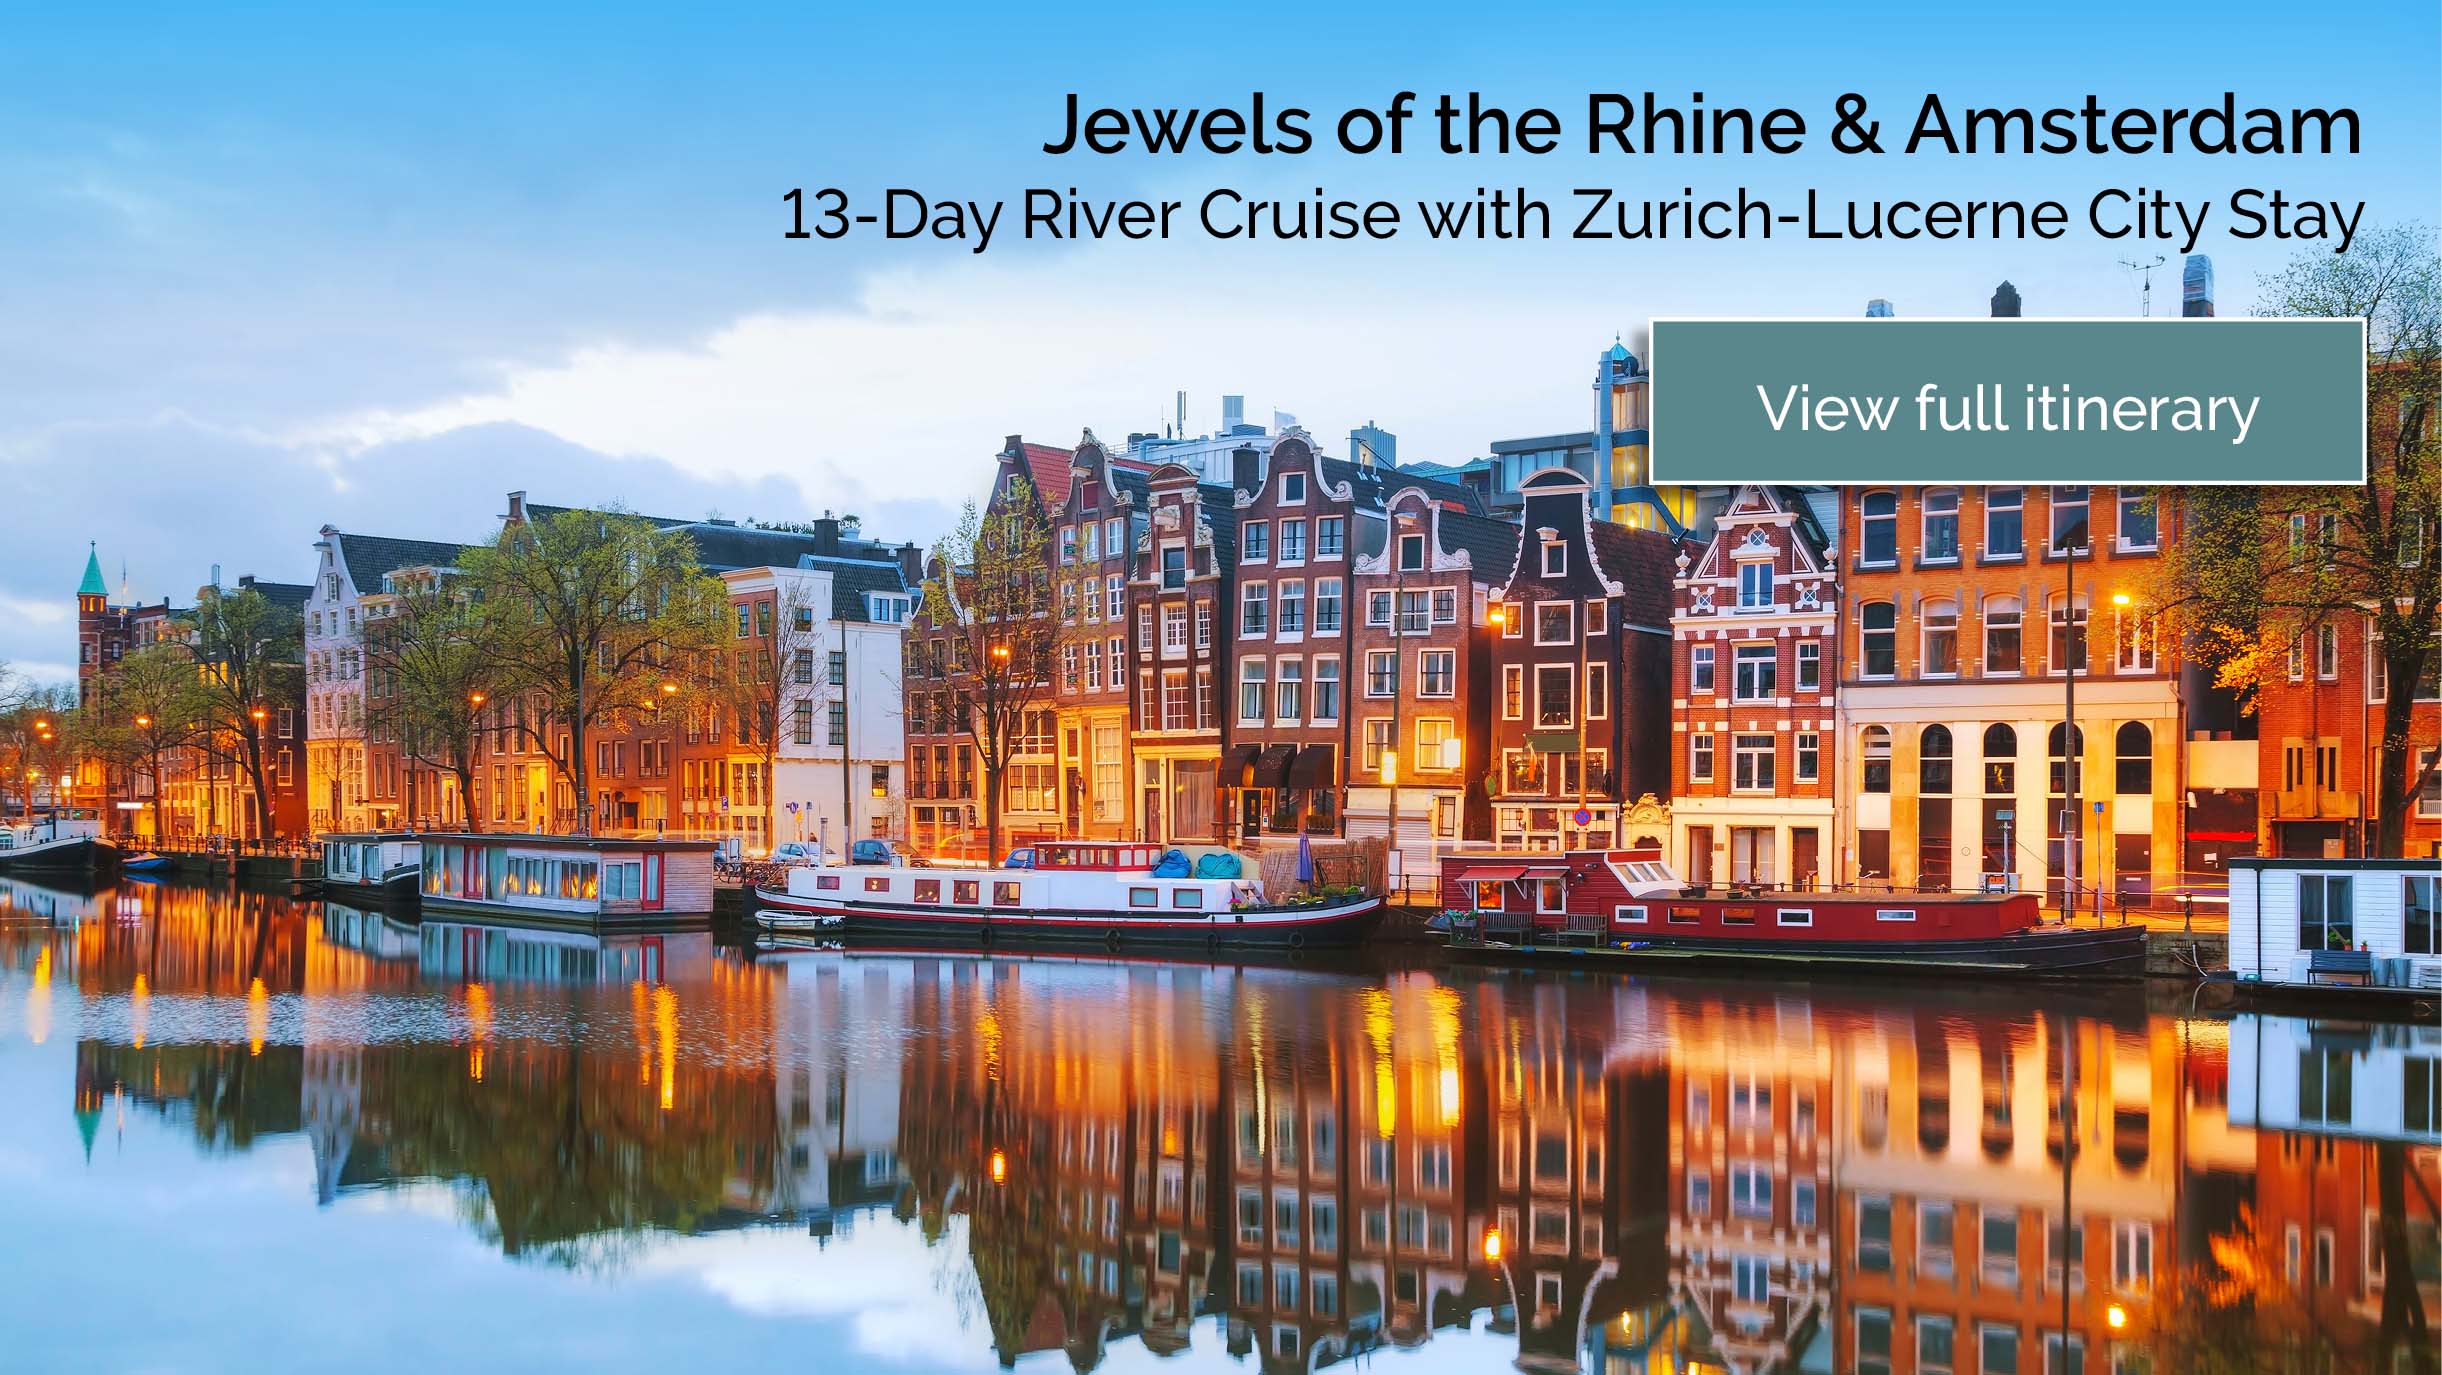 view the full Jewels of the Rhine & Amsterdam 13-Day River Cruise with Zurich-Lucerne City Stay itinerary here